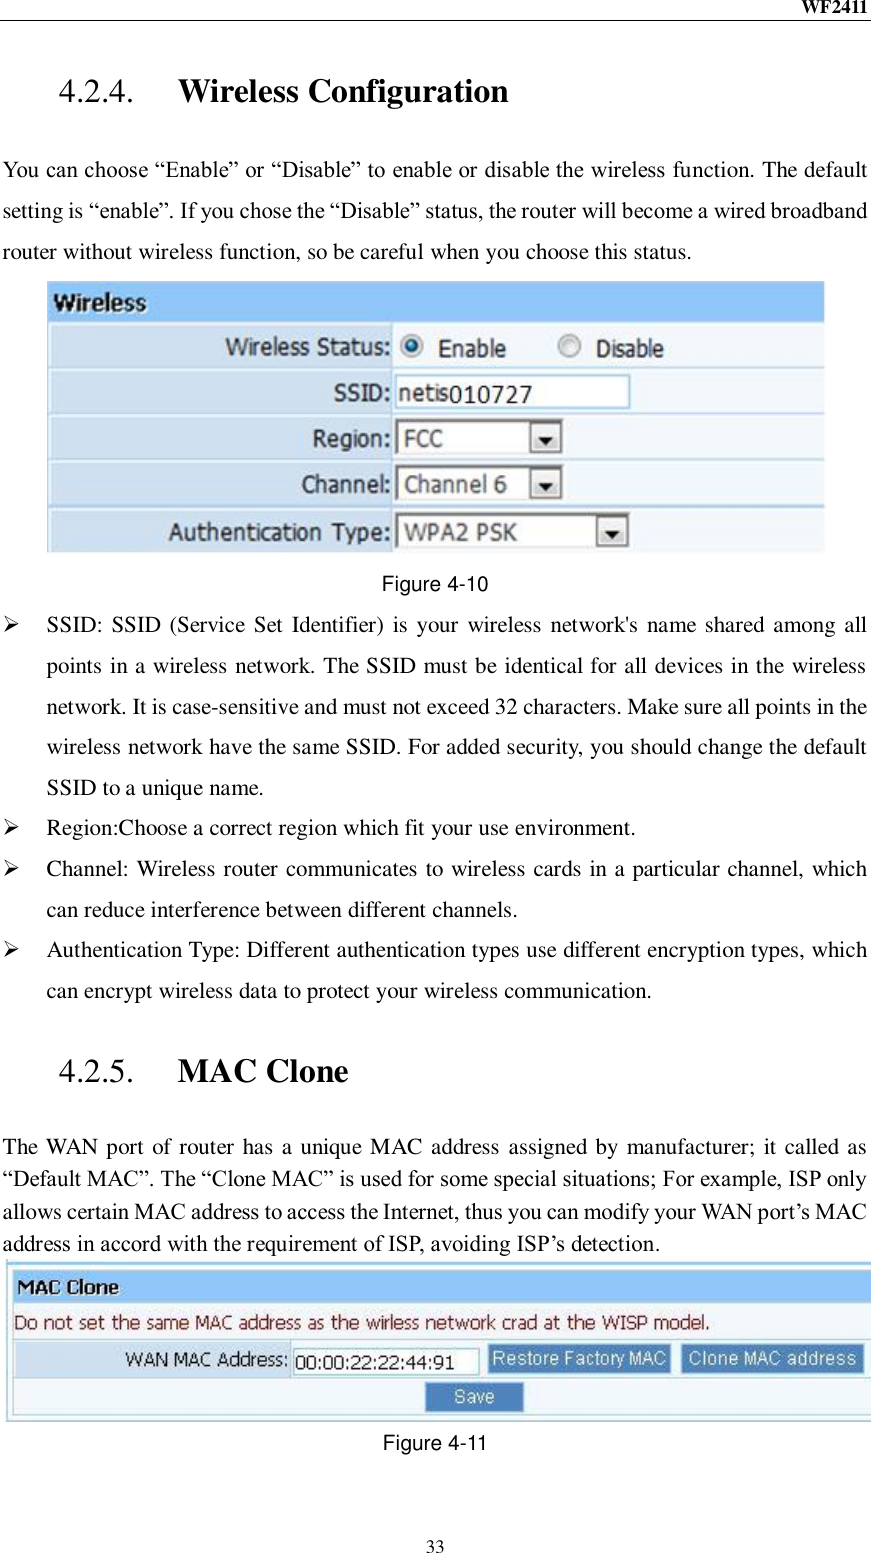 WF2411  33 4.2.4. Wireless Configuration You can choose “Enable” or “Disable” to enable or disable the wireless function. The default setting is “enable”. If you chose the “Disable” status, the router will become a wired broadband router without wireless function, so be careful when you choose this status.  Figure 4-10  SSID:  SSID (Service Set Identifier) is your  wireless network&apos;s name shared among all points in a wireless network. The SSID must be identical for all devices in the wireless network. It is case-sensitive and must not exceed 32 characters. Make sure all points in the wireless network have the same SSID. For added security, you should change the default SSID to a unique name.  Region:Choose a correct region which fit your use environment.  Channel: Wireless router communicates to wireless cards in a particular channel, which can reduce interference between different channels.  Authentication Type: Different authentication types use different encryption types, which can encrypt wireless data to protect your wireless communication. 4.2.5. MAC Clone The WAN port of router has a unique MAC address assigned by manufacturer; it called as “Default MAC”. The “Clone MAC” is used for some special situations; For example, ISP only allows certain MAC address to access the Internet, thus you can modify your WAN port‟s MAC address in accord with the requirement of ISP, avoiding ISP‟s detection.  Figure 4-11 